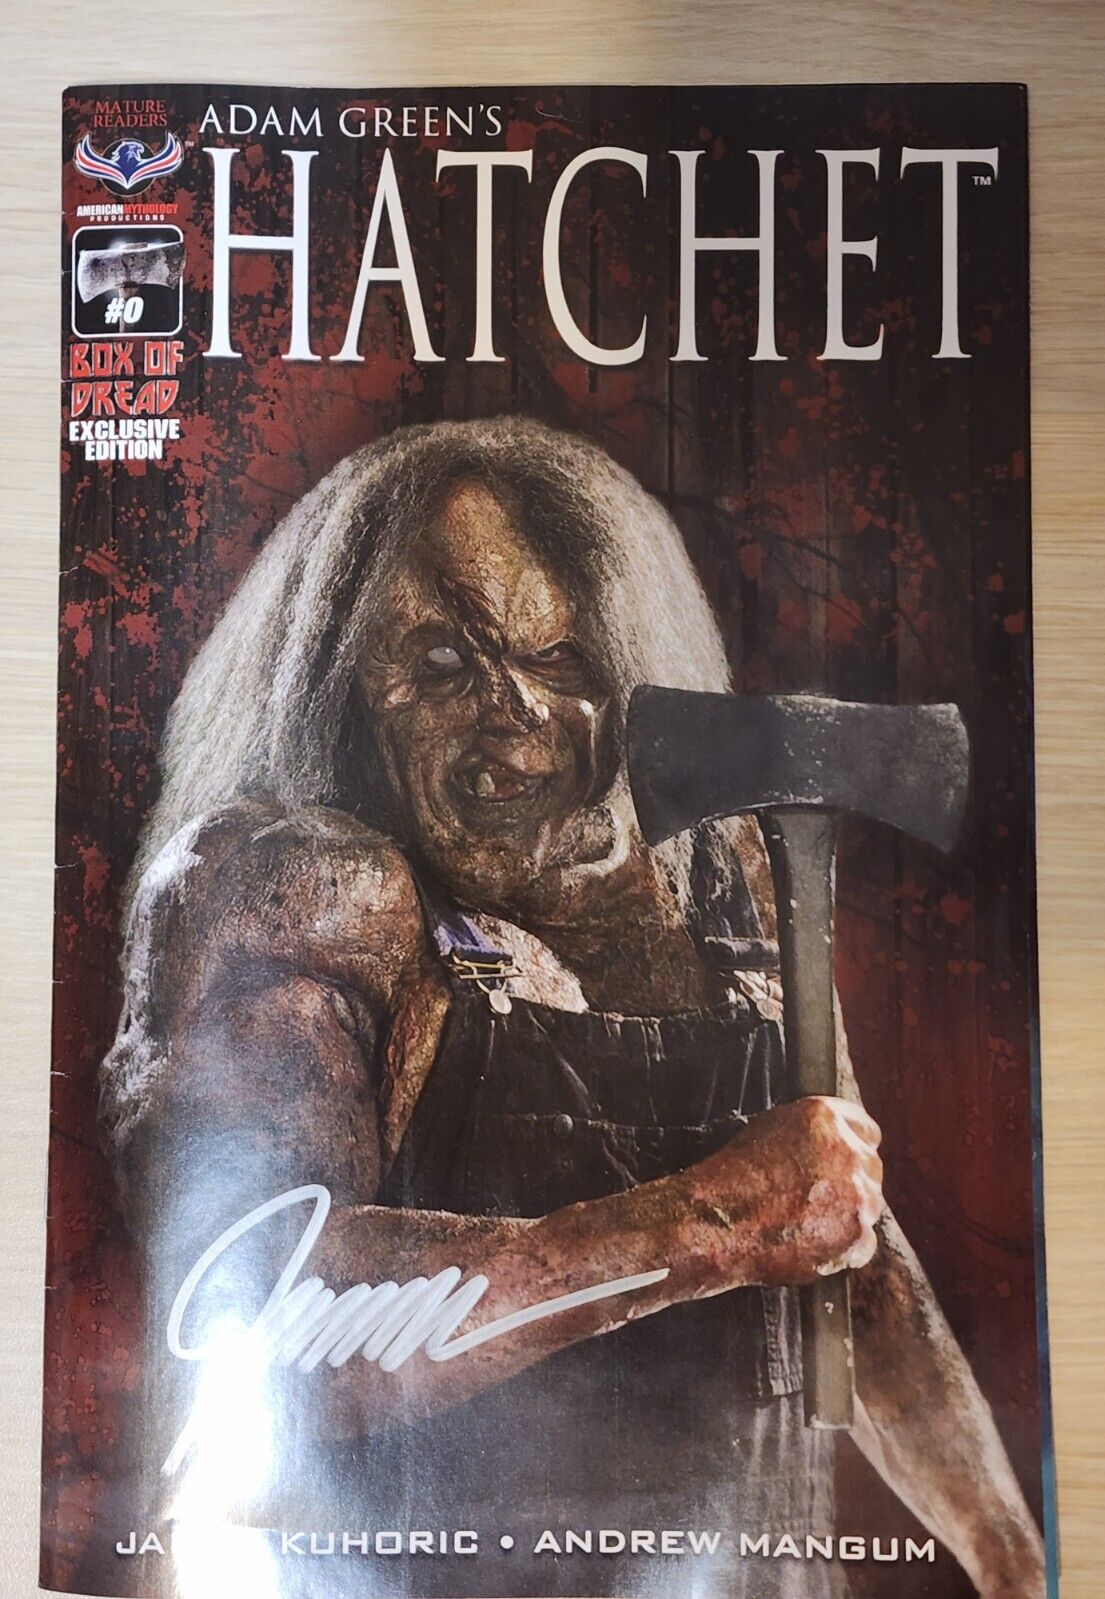 ADAM GREEN'S HATCHET #0 - Box Of Dread - Exclusive Edition **Signed Cover**